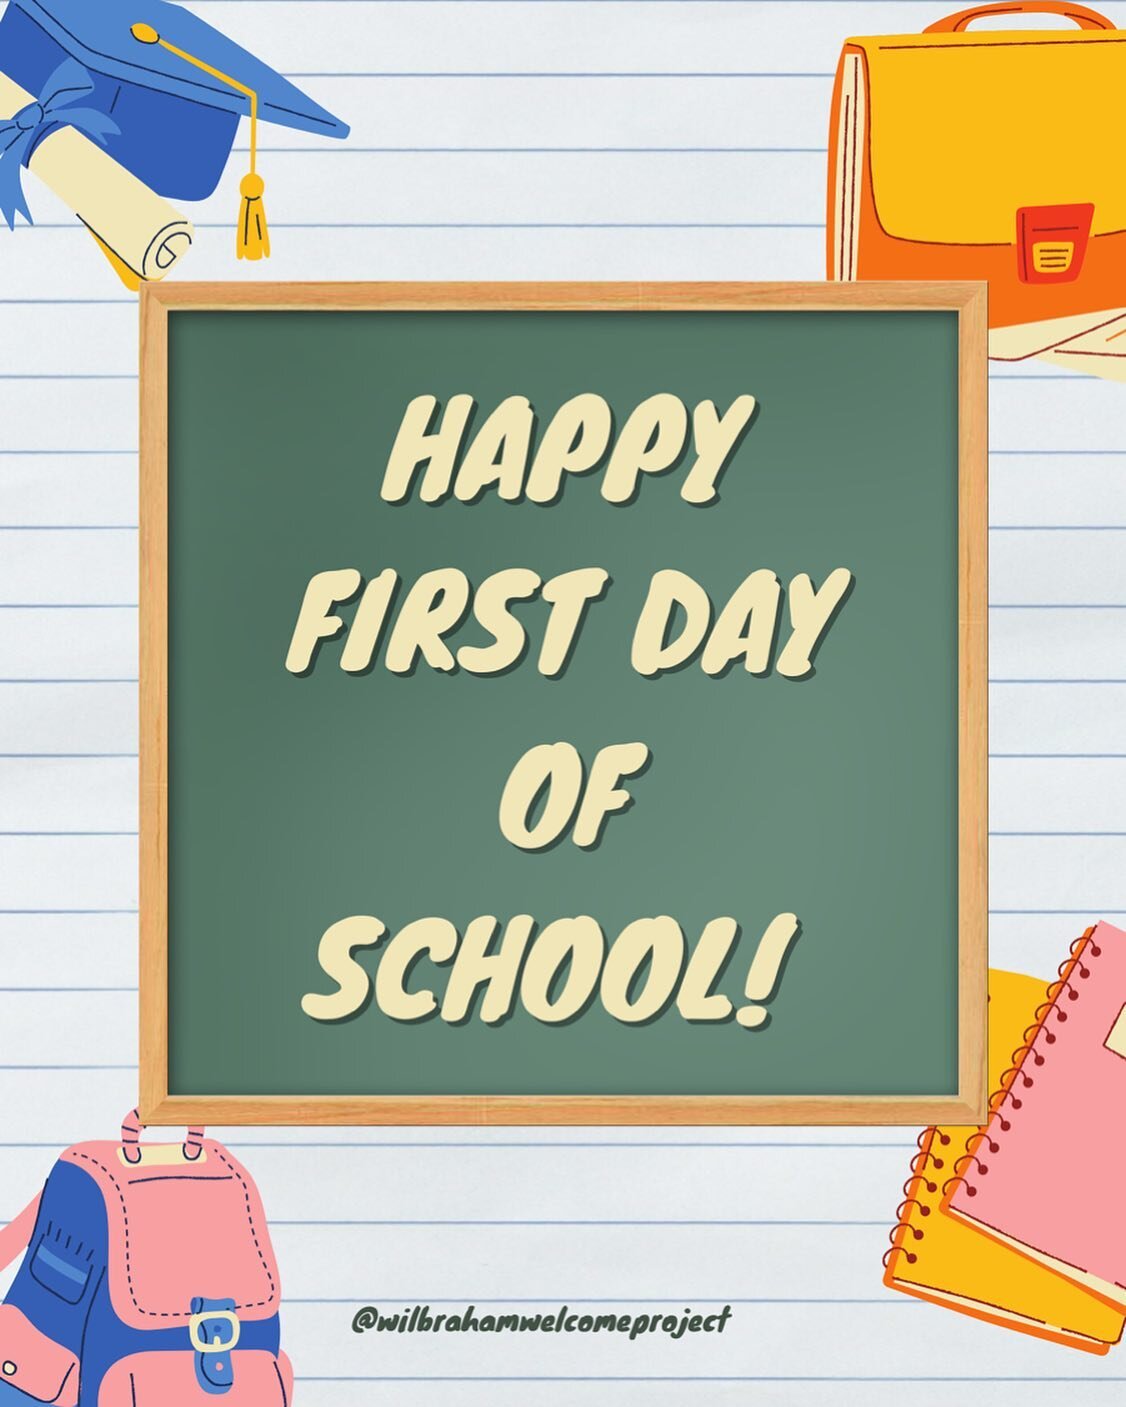 To all of our educators and support professionals, administrators, food service workers, bus drivers, coaches, parents, and most importantly our students- we hope you have a great day today! Here&rsquo;s to a new year of growing and learning!